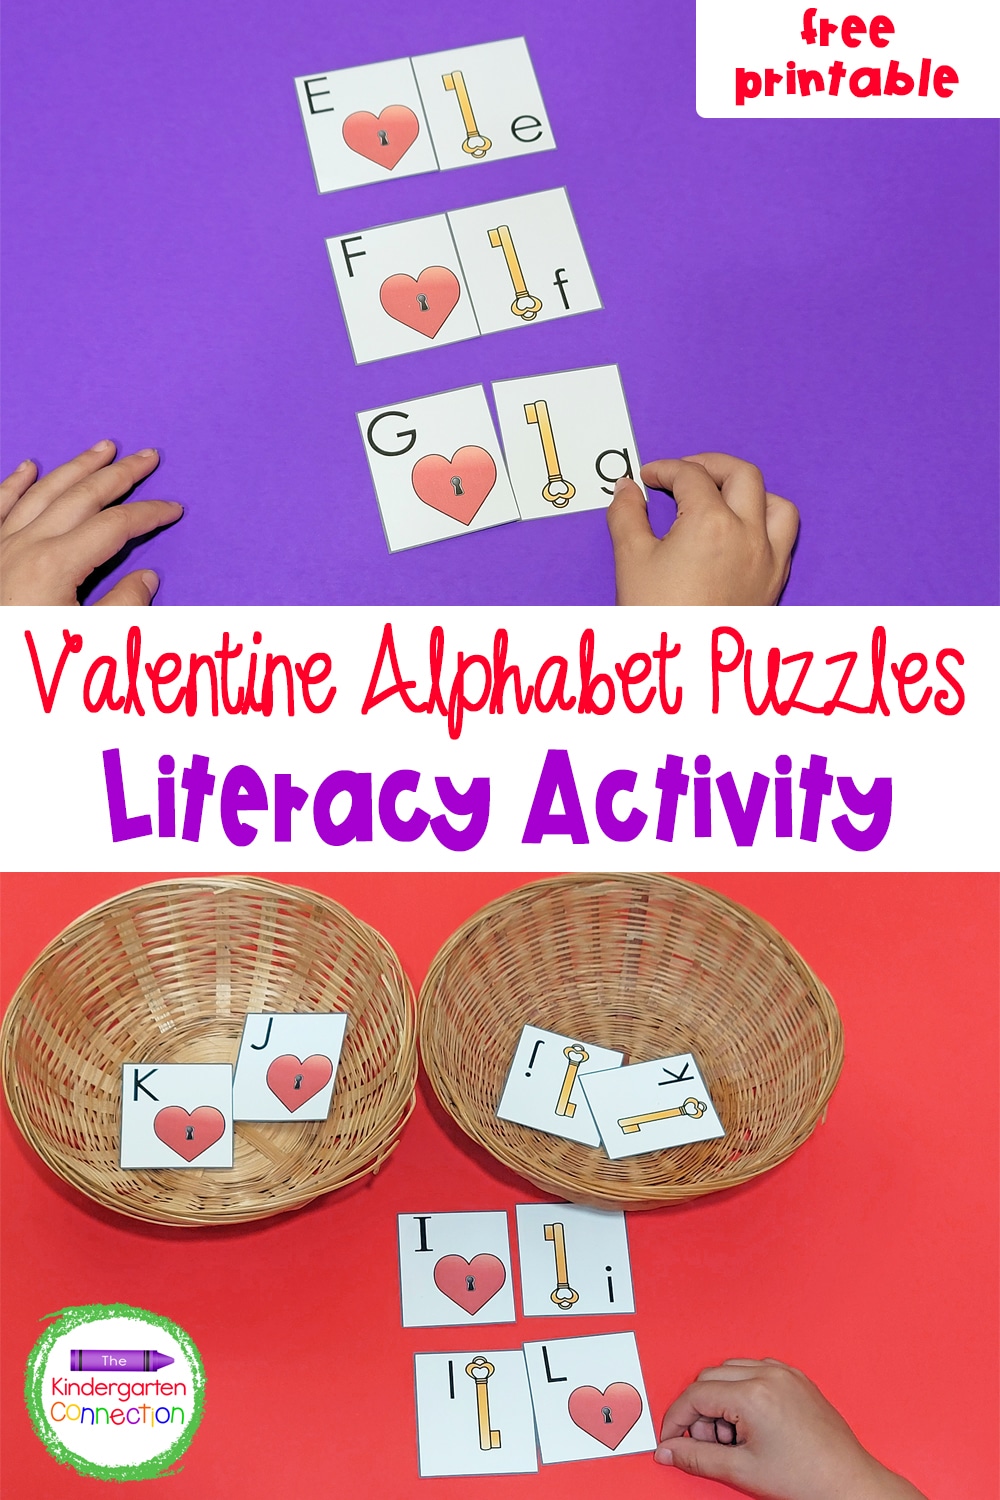 Practice letter recognition with these free printable Valentine Alphabet Puzzles! They're easy to prep and super fun!